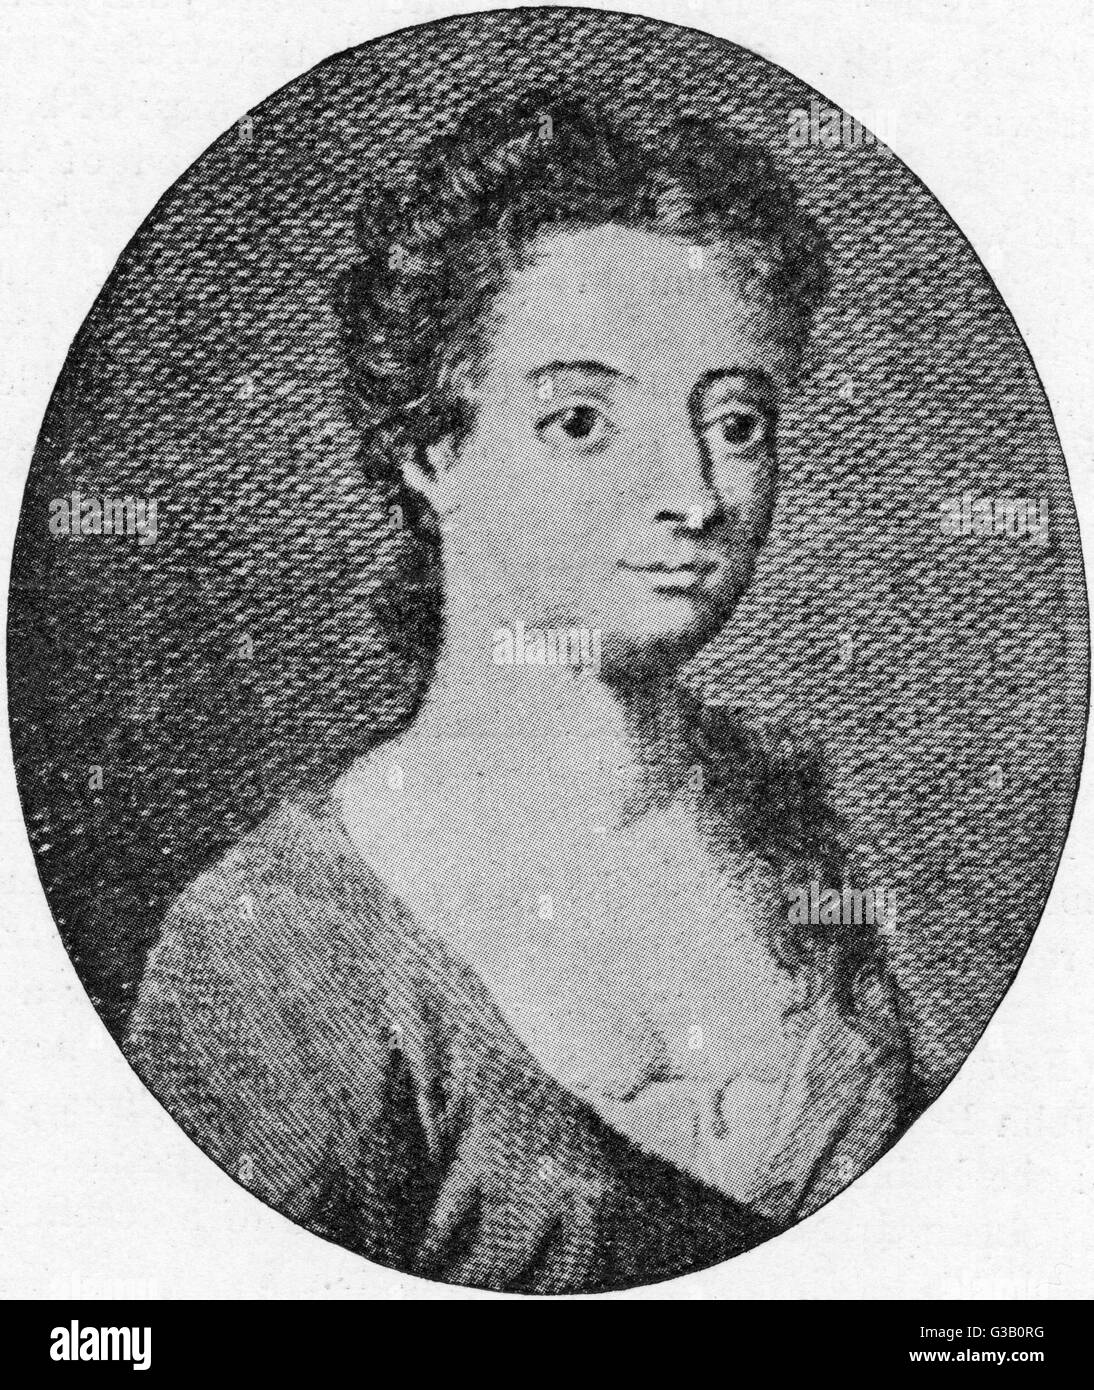 FRANCESCA CUZZONI  Italian soprano, particularly  in Handel opera: her rivalry  with Faustina Bordoni led to a  fight on stage in 1727     Date: 1698 - 1770 Stock Photo